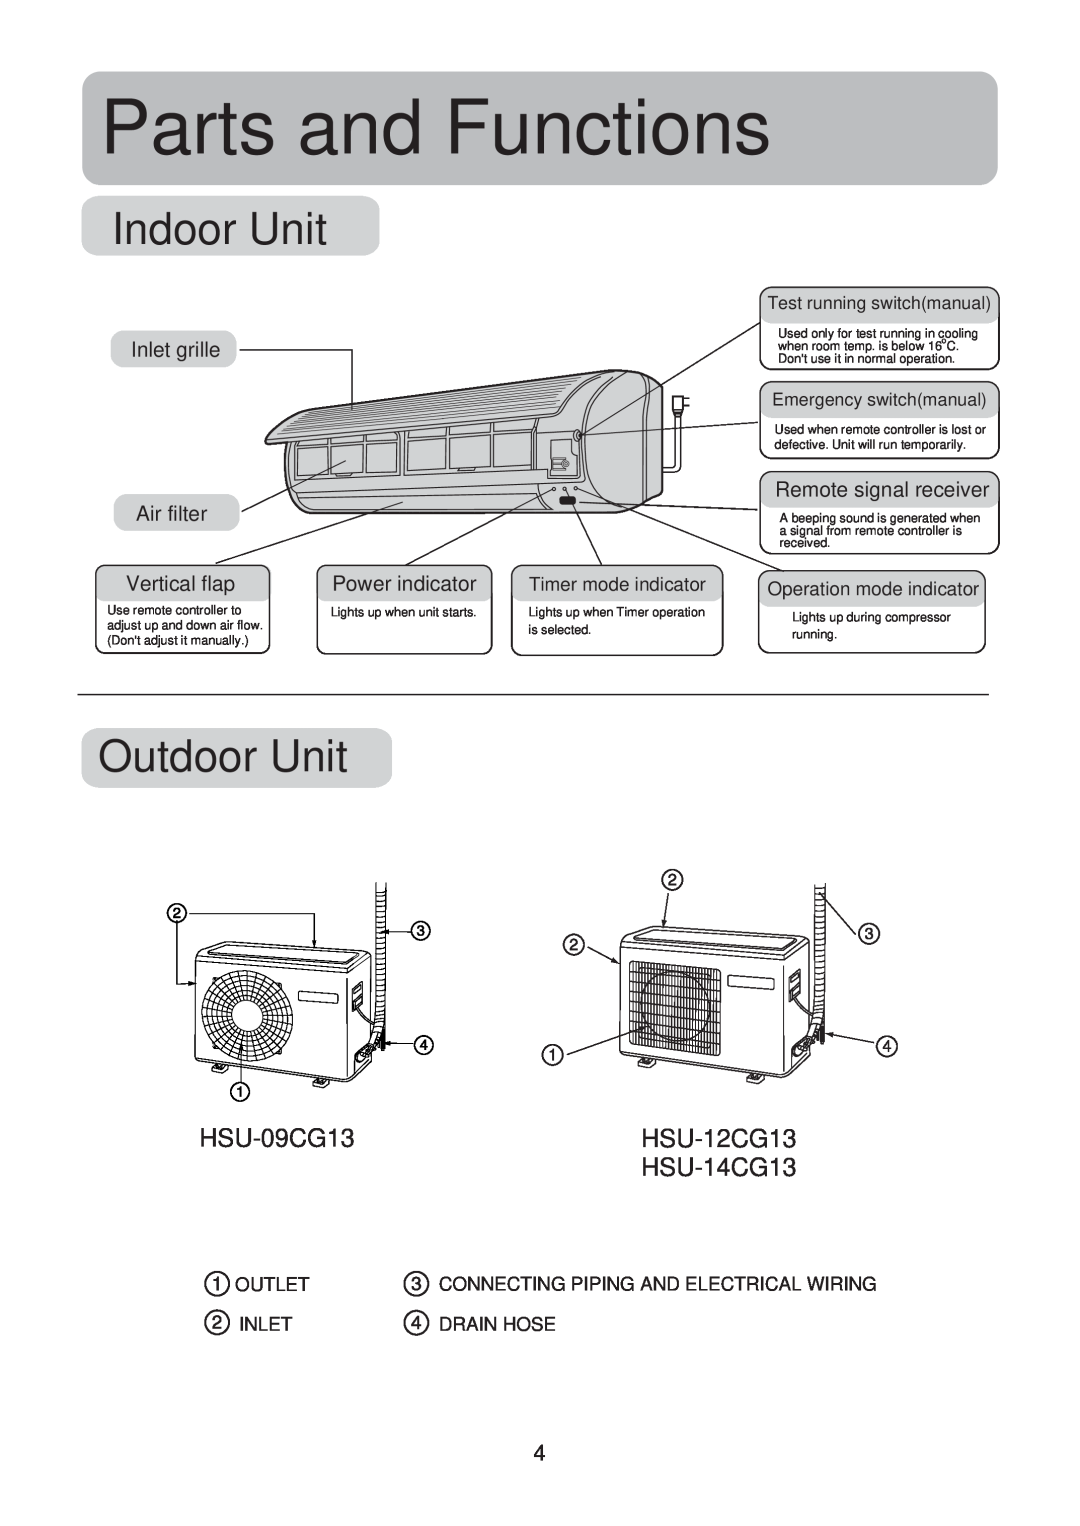 Haier operation manual Parts and Functions, Indoor Unit, Outdoor Unit, HSU-09CG13HSU-12CG13 HSU-14CG13 